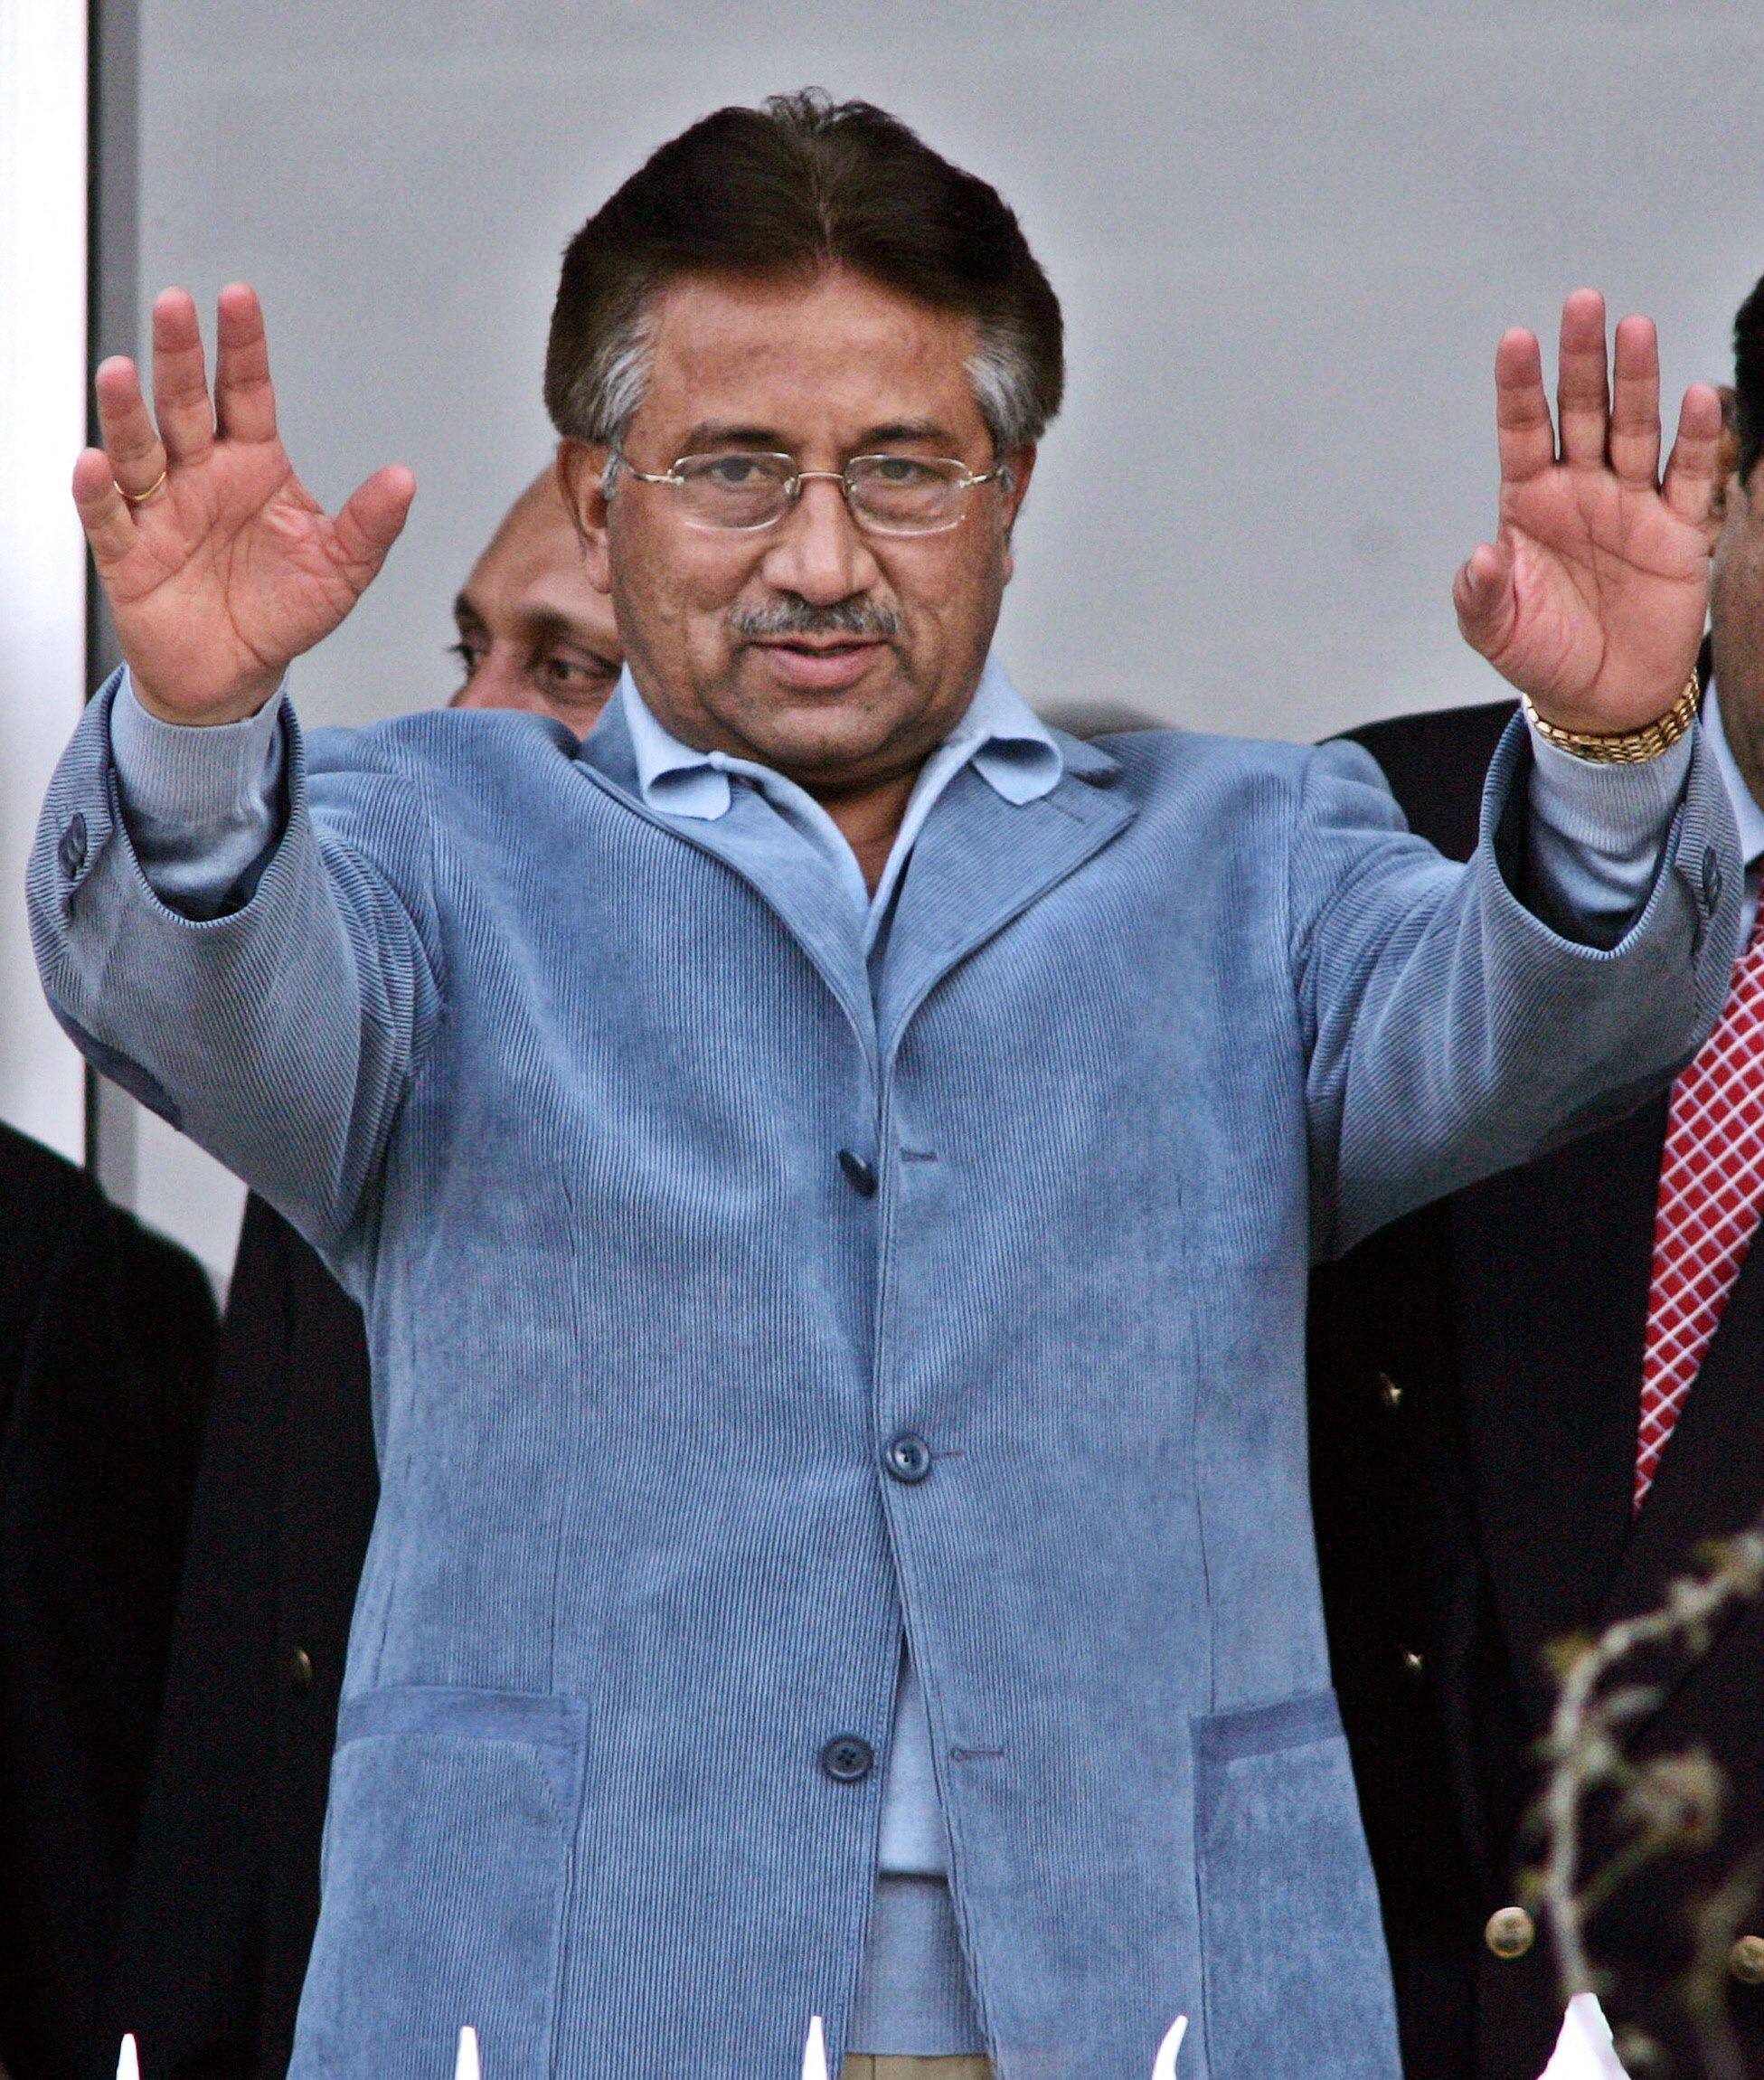 Pakistan’s then president, Pervez Musharraf, waves to the crowd during a cricket match between Pakistan and India in 2006. Photo: AFP